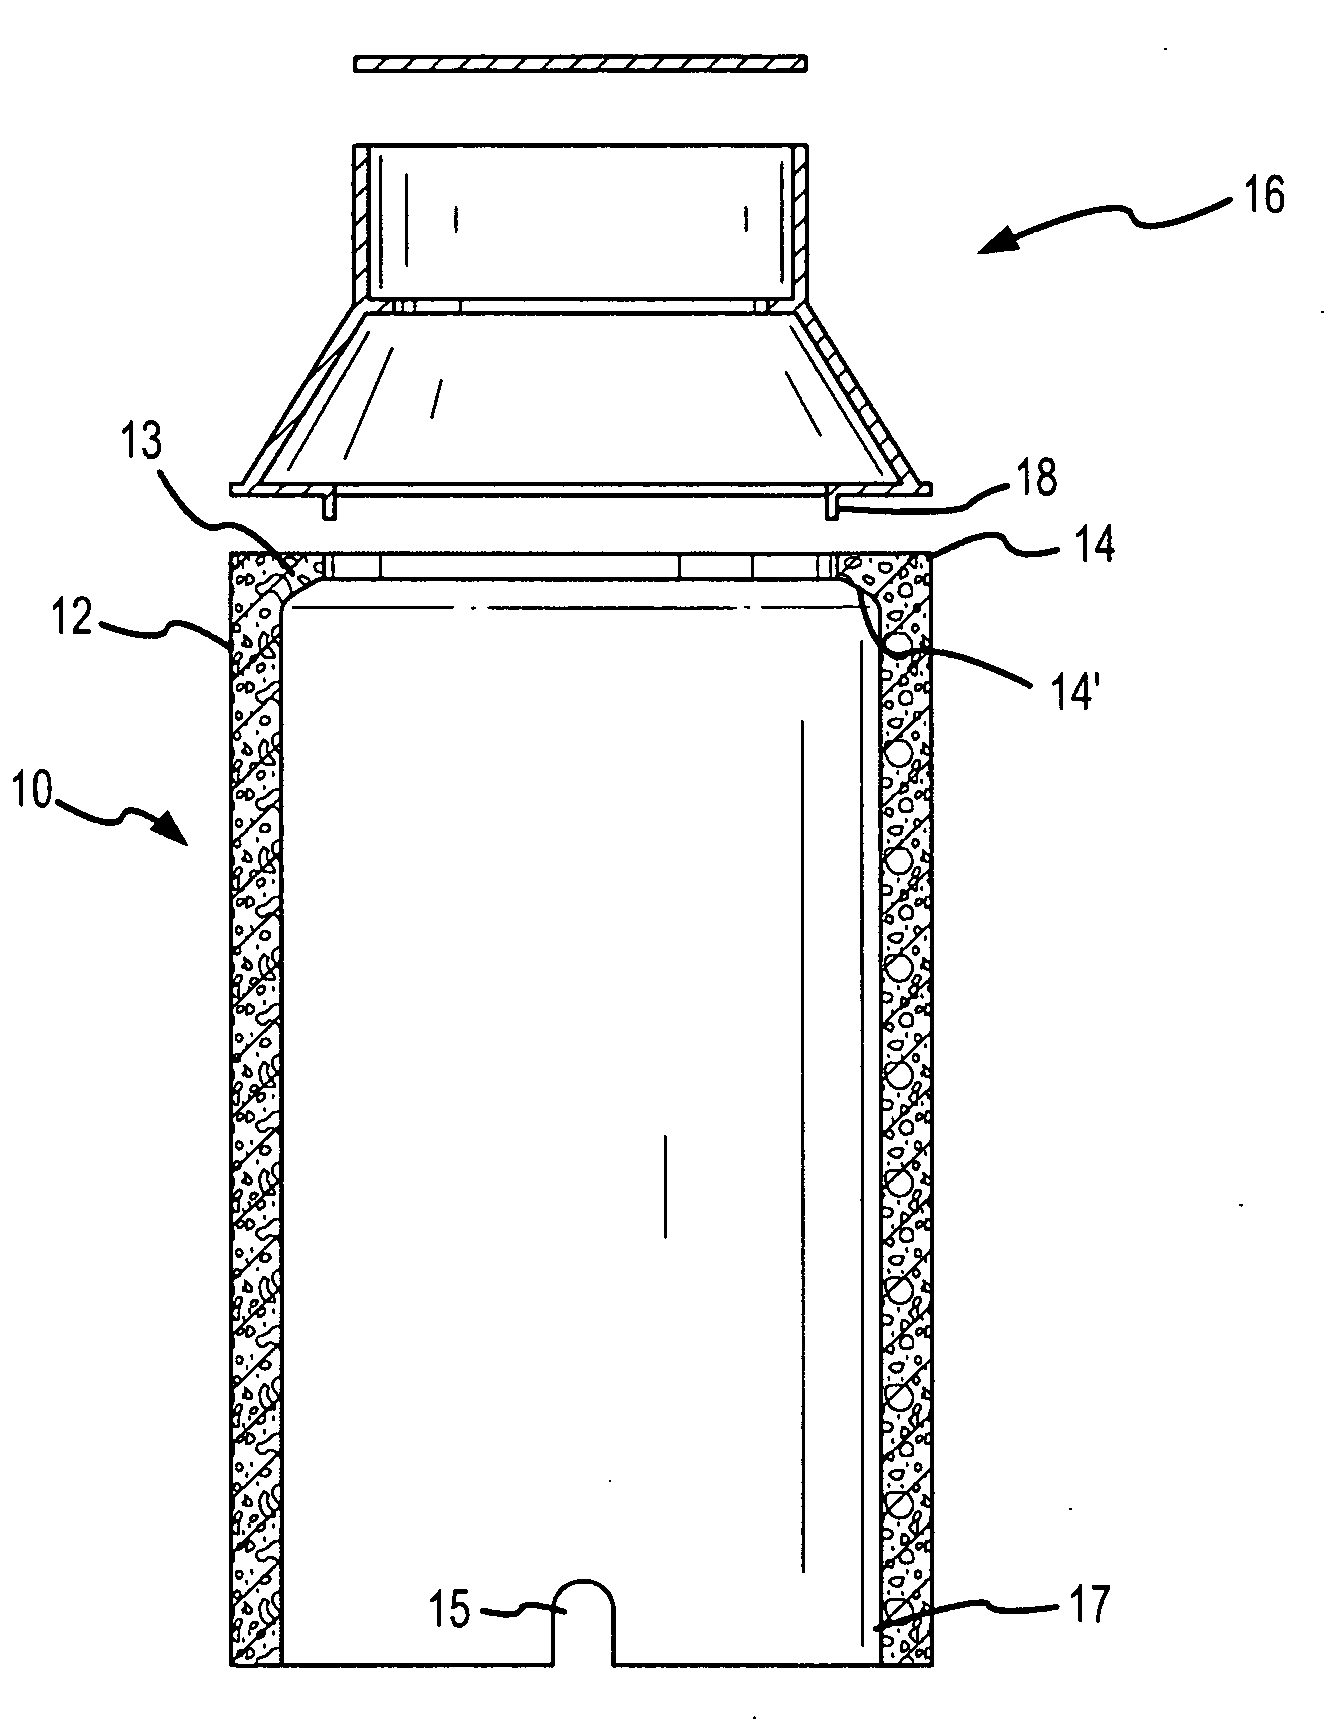 Method of fabricating a precast concrete meter pit